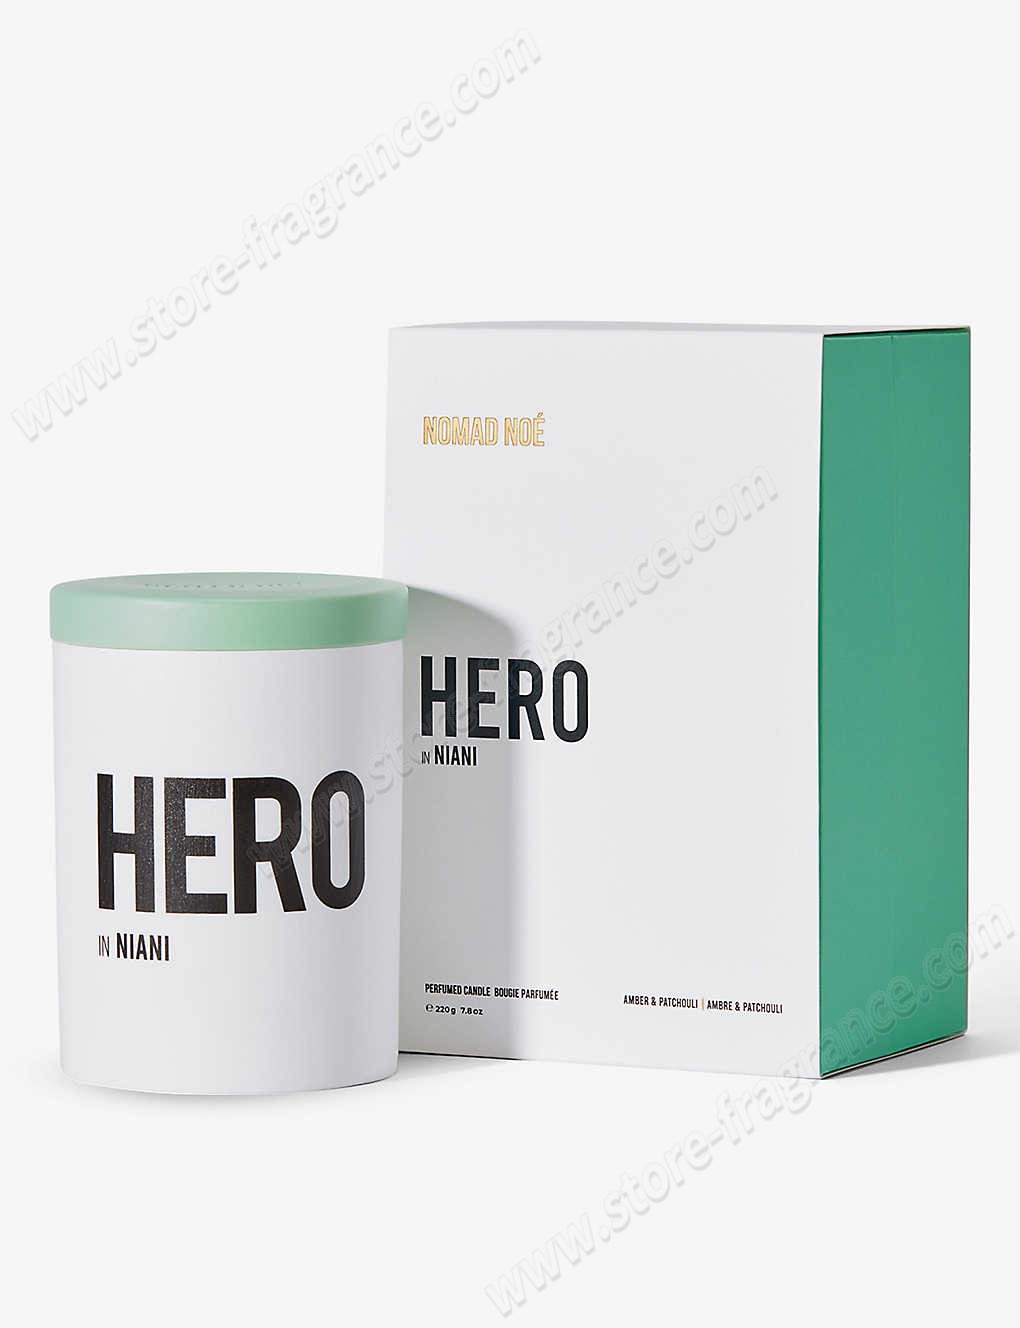 NOMAD NOE/Hero In Niani scented candle 220g ✿ Discount Store - NOMAD NOE/Hero In Niani scented candle 220g ✿ Discount Store